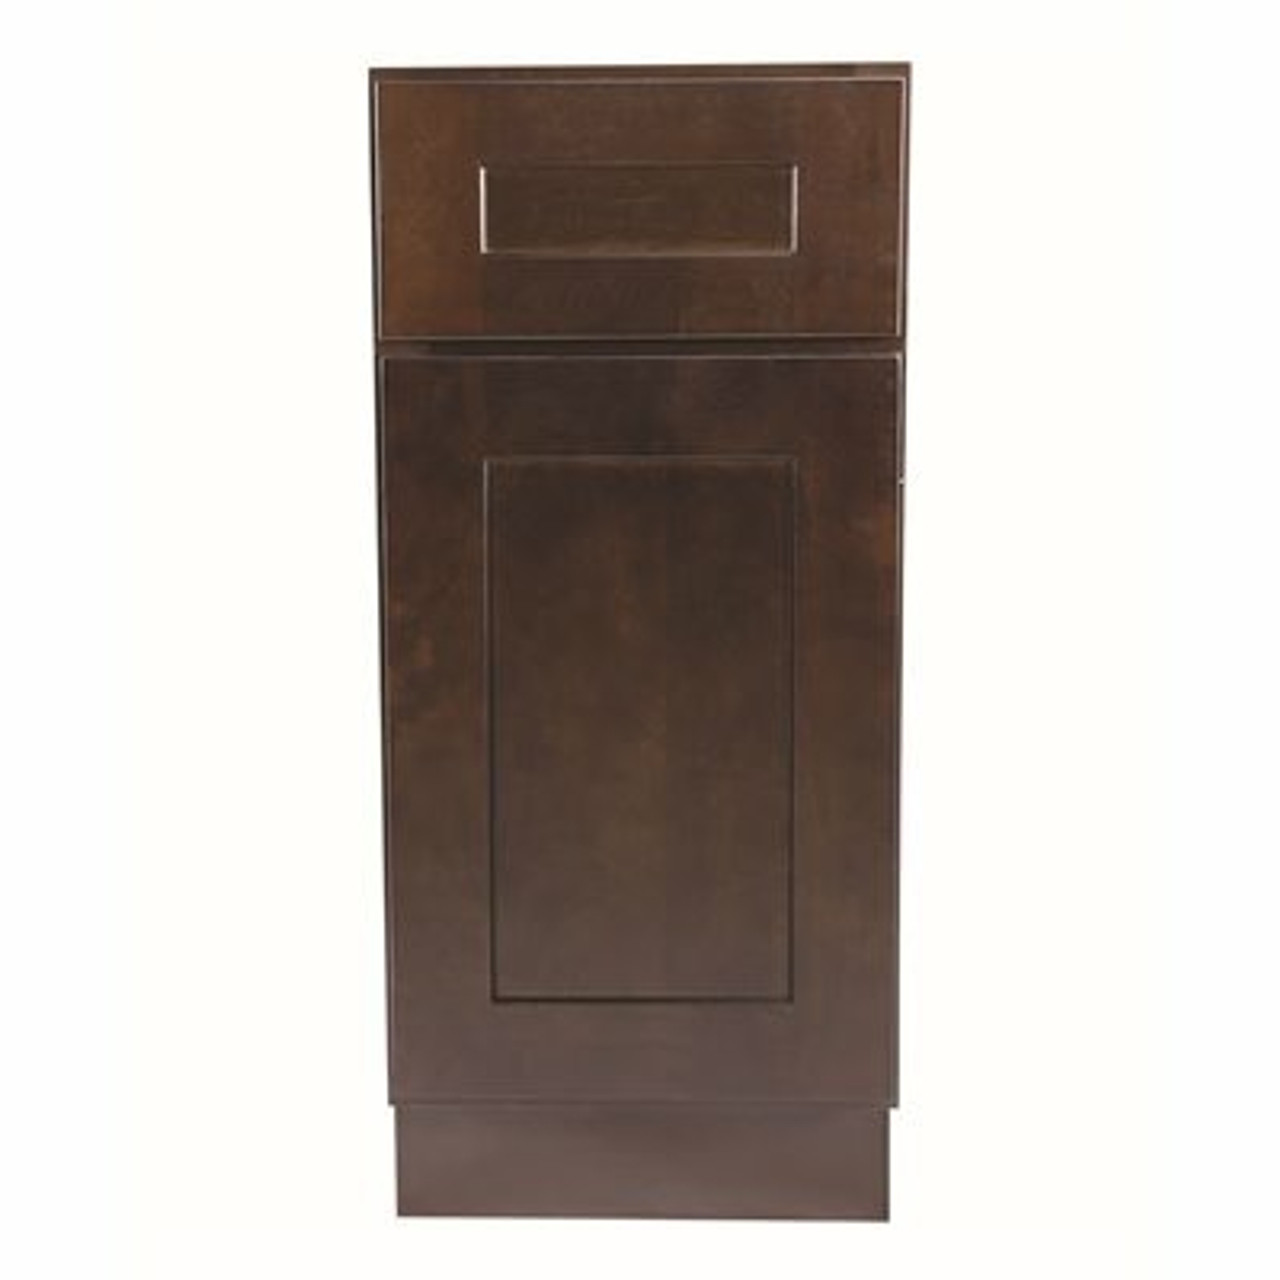 Design House Brookings Plywood Ready To Assemble Shaker 9X34.5X24 In. 1-Door 1-Drawer Base Kitchen Cabinet In Espresso